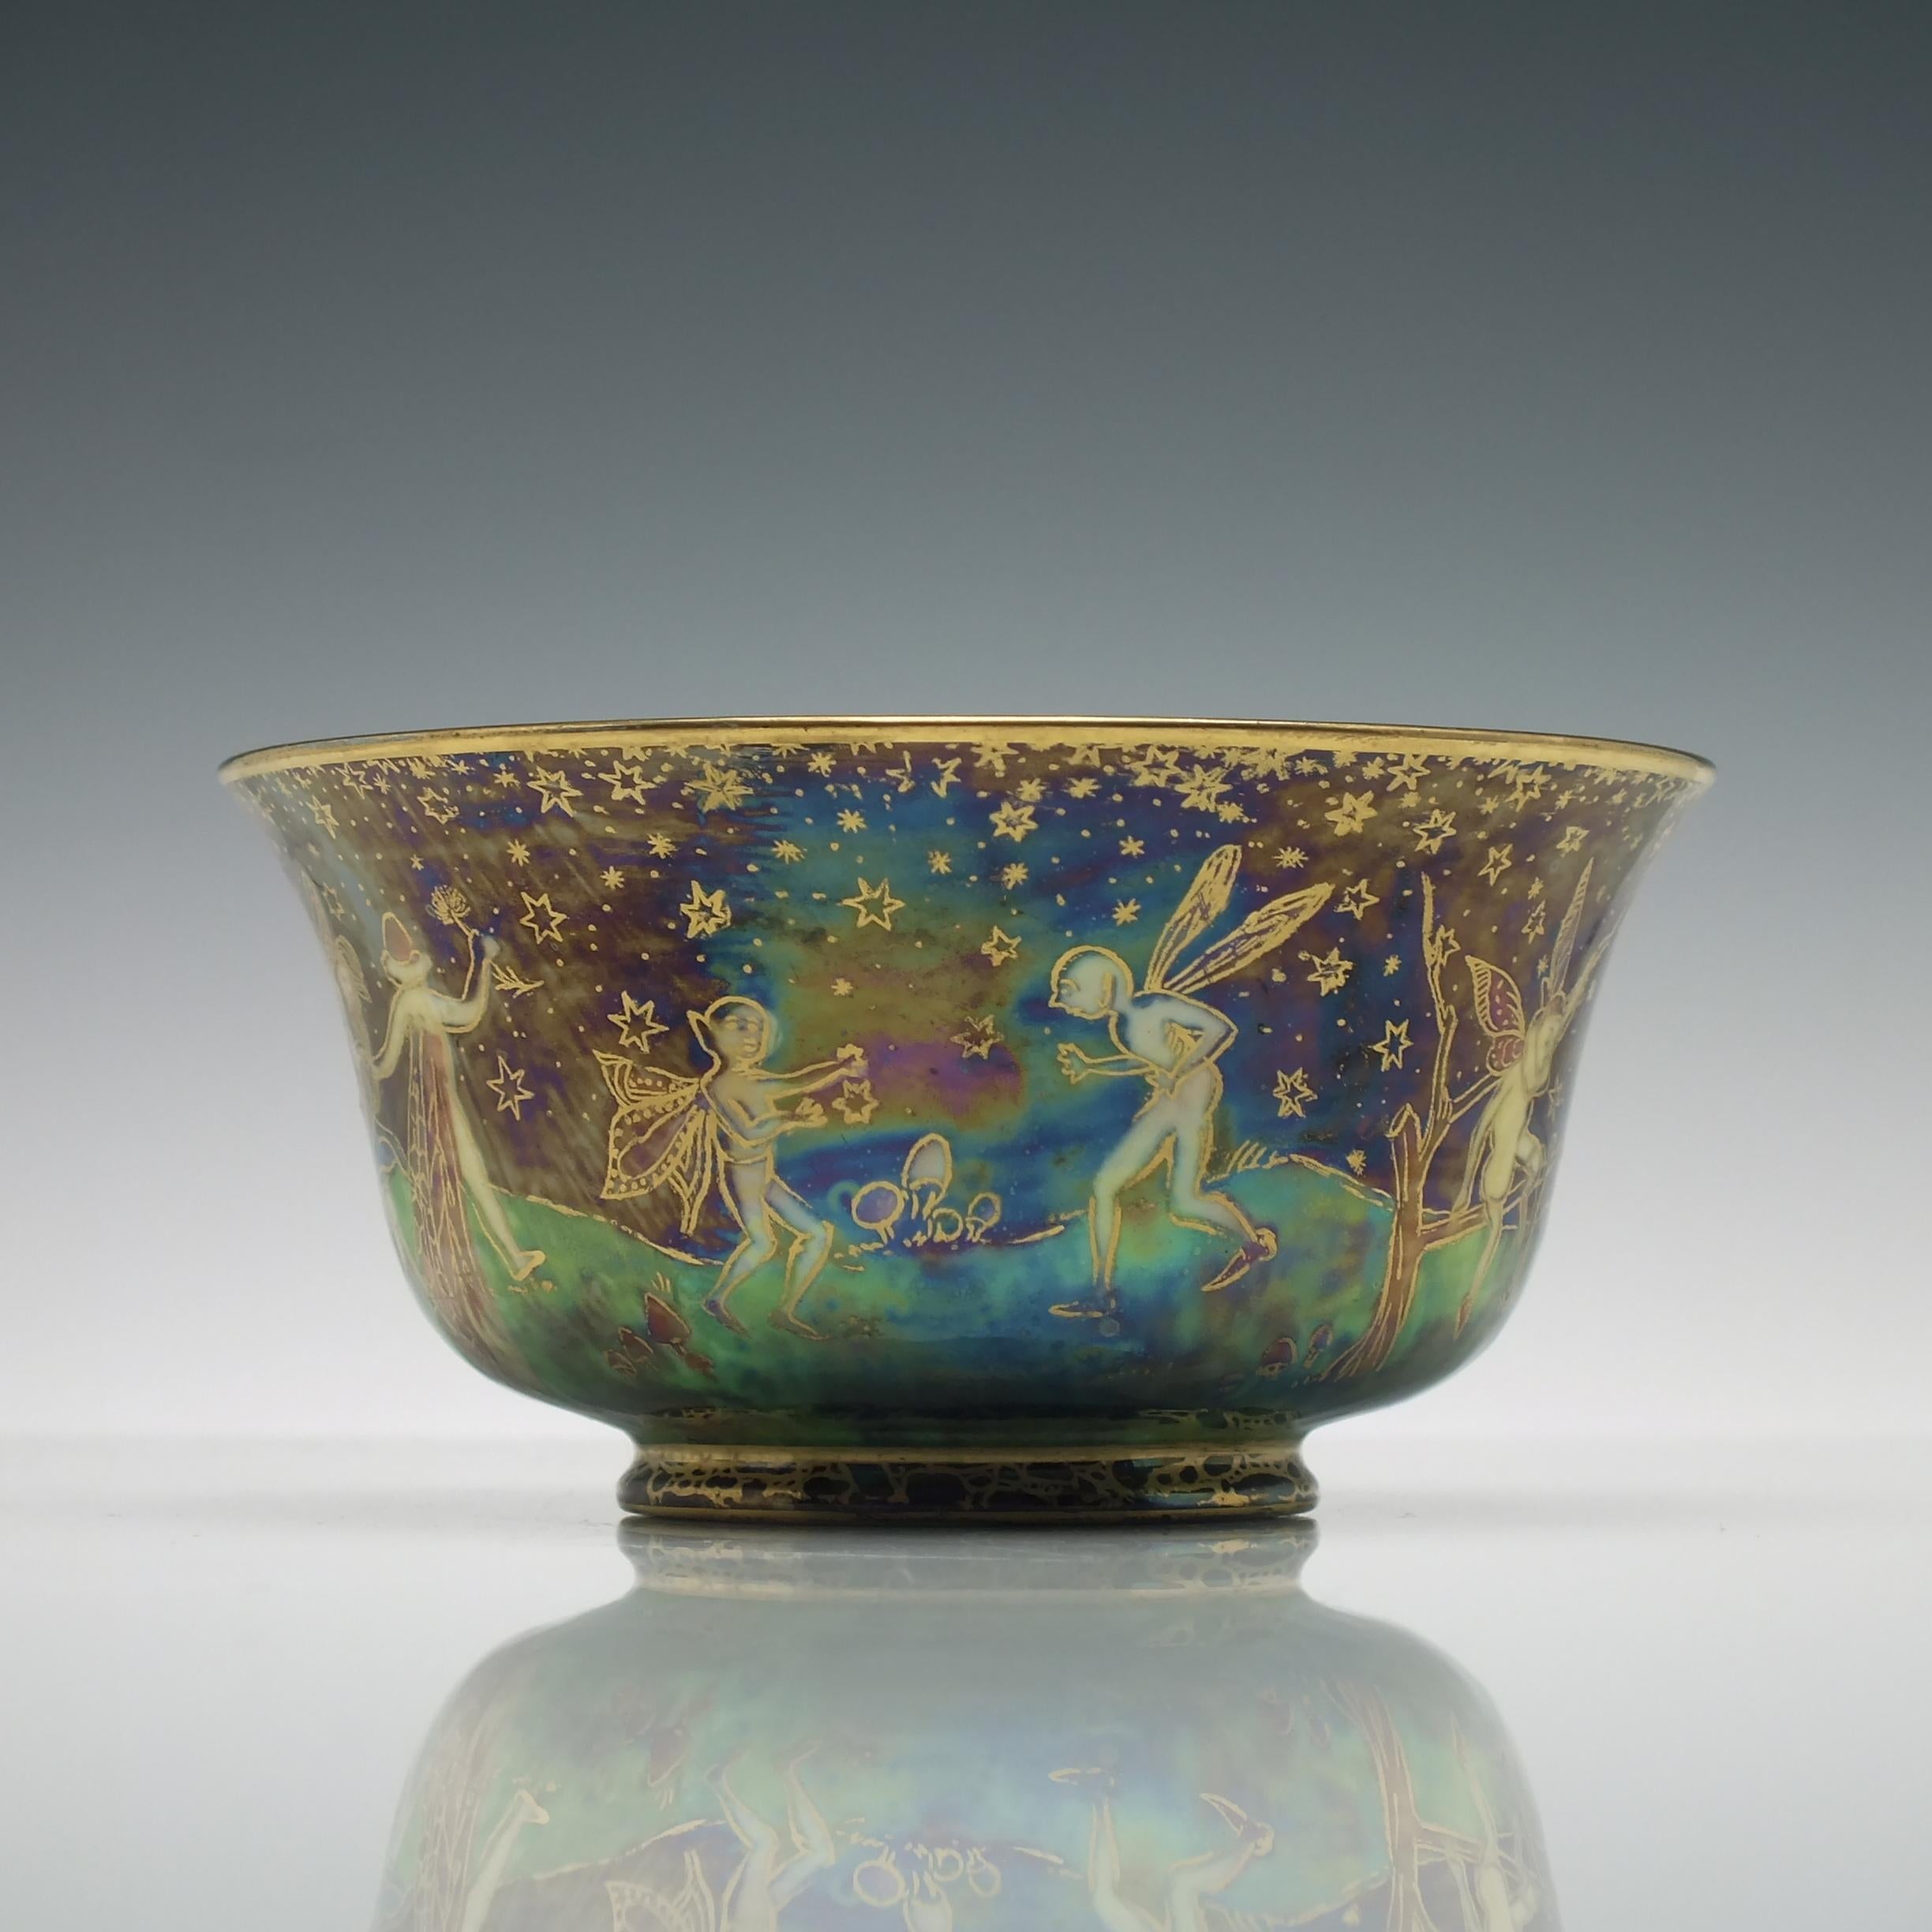 Date & origin:

England, circa 1920. Period of George V.

Condition:

Excellent, age-related wear as shown. 

Dimensions 

Height 6cm, diameter 11.9cm.

Weight

175 grams

Technical description:

A Wedgwood Fairyland Lustre cup.